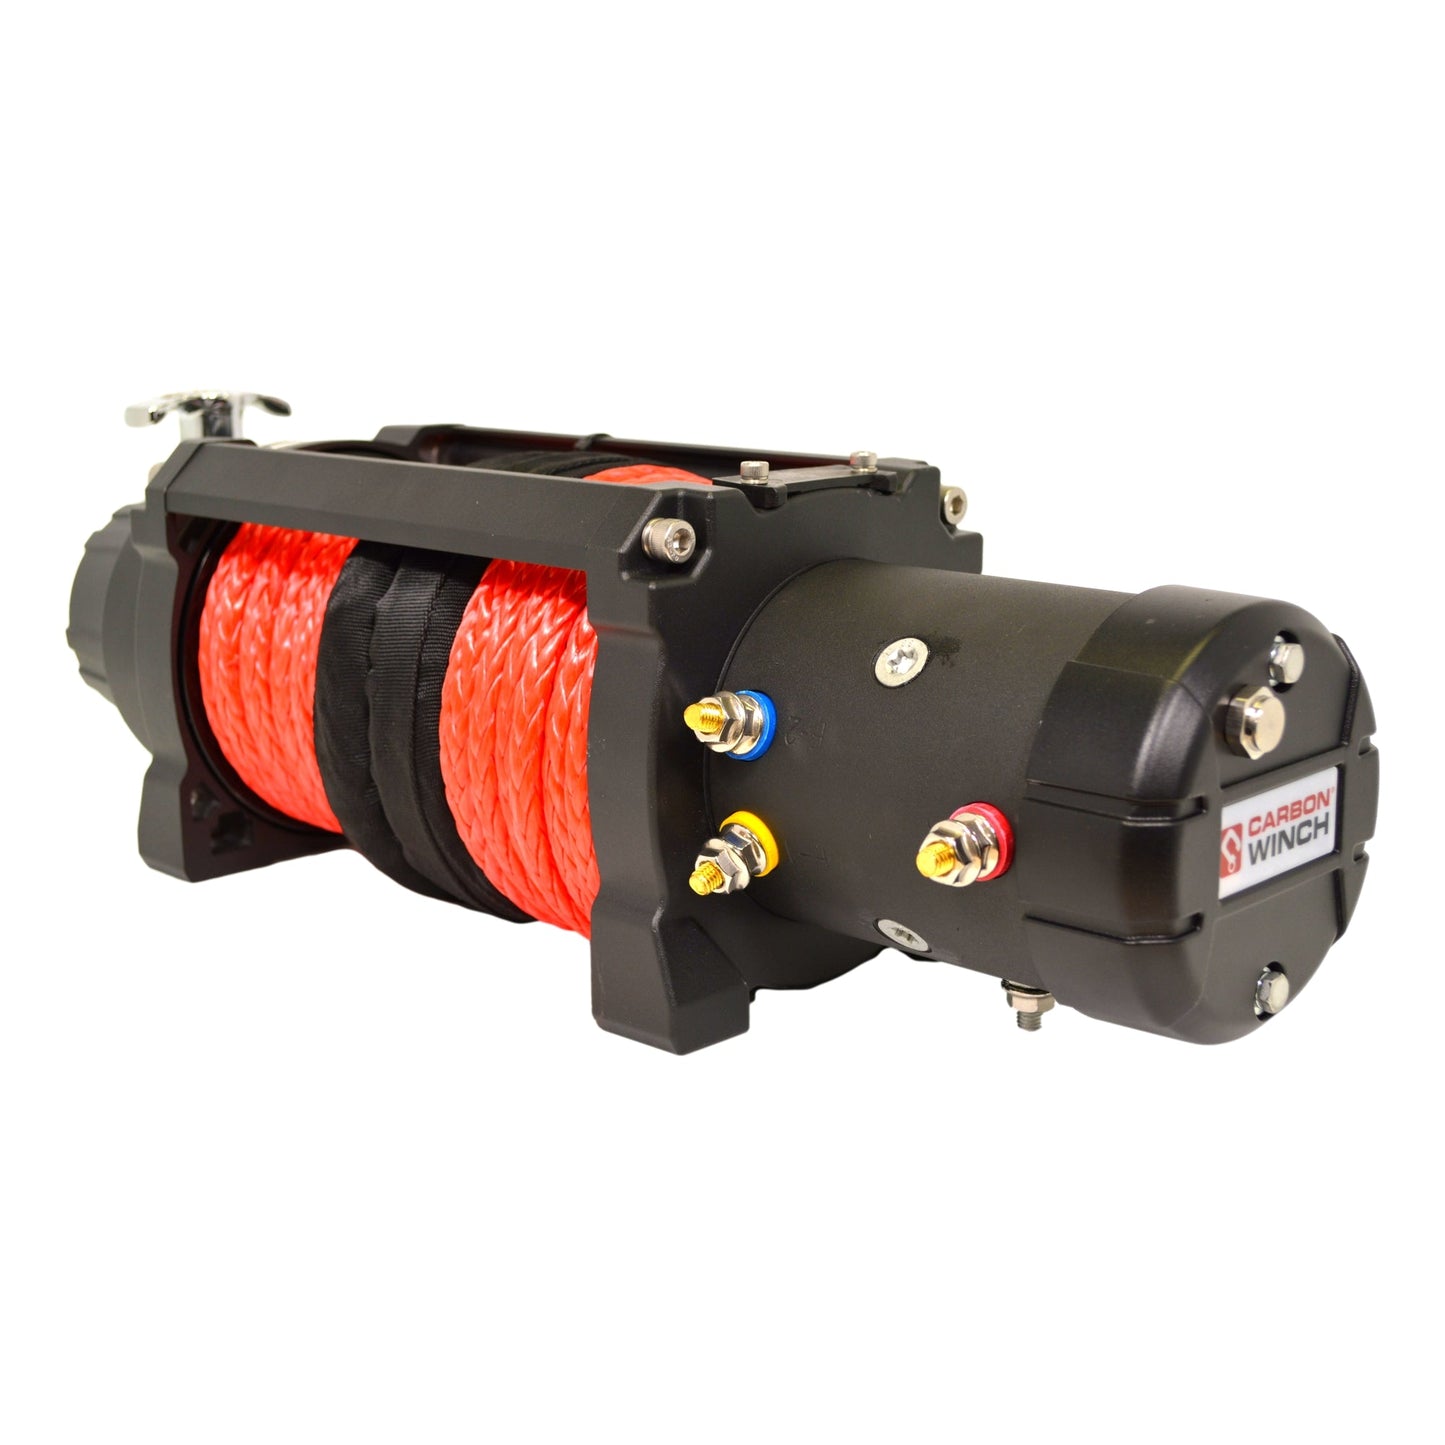 24 VOLT Carbon 12K 12000lb Electric winch with synthetic rope - CW-12K_24V 5